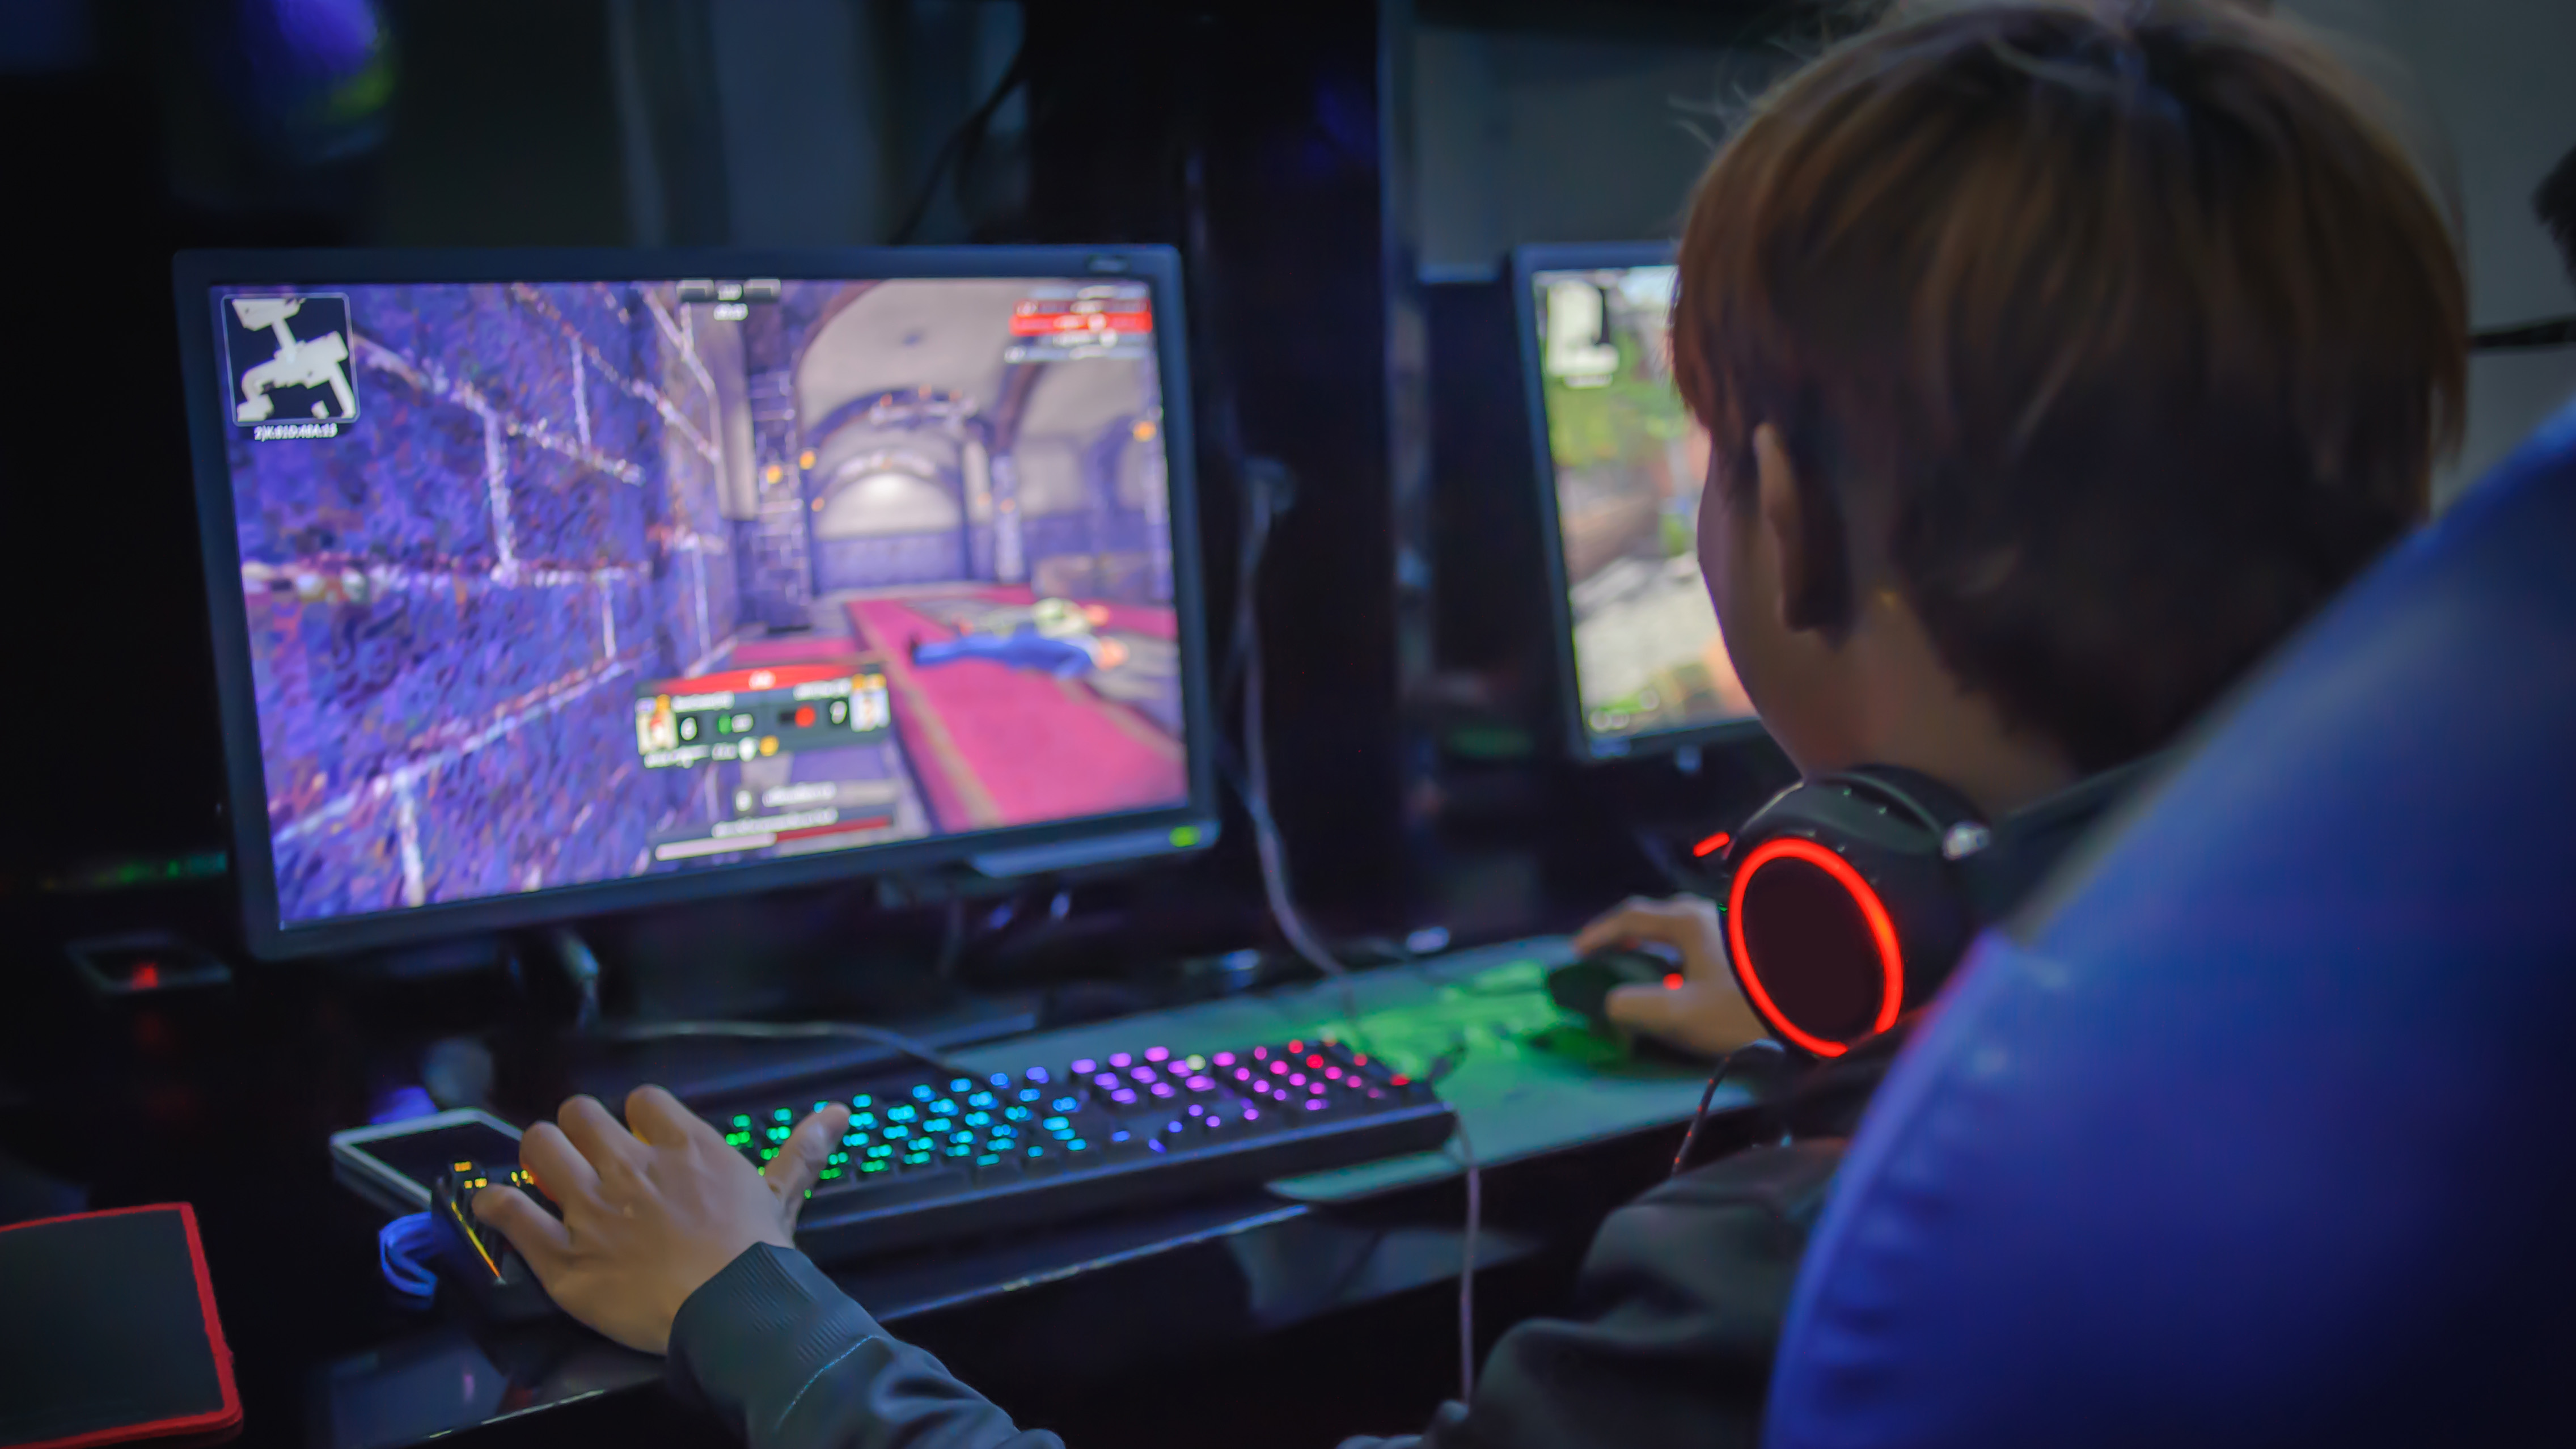 It's official, Chinese minors now can only play online games 1.5